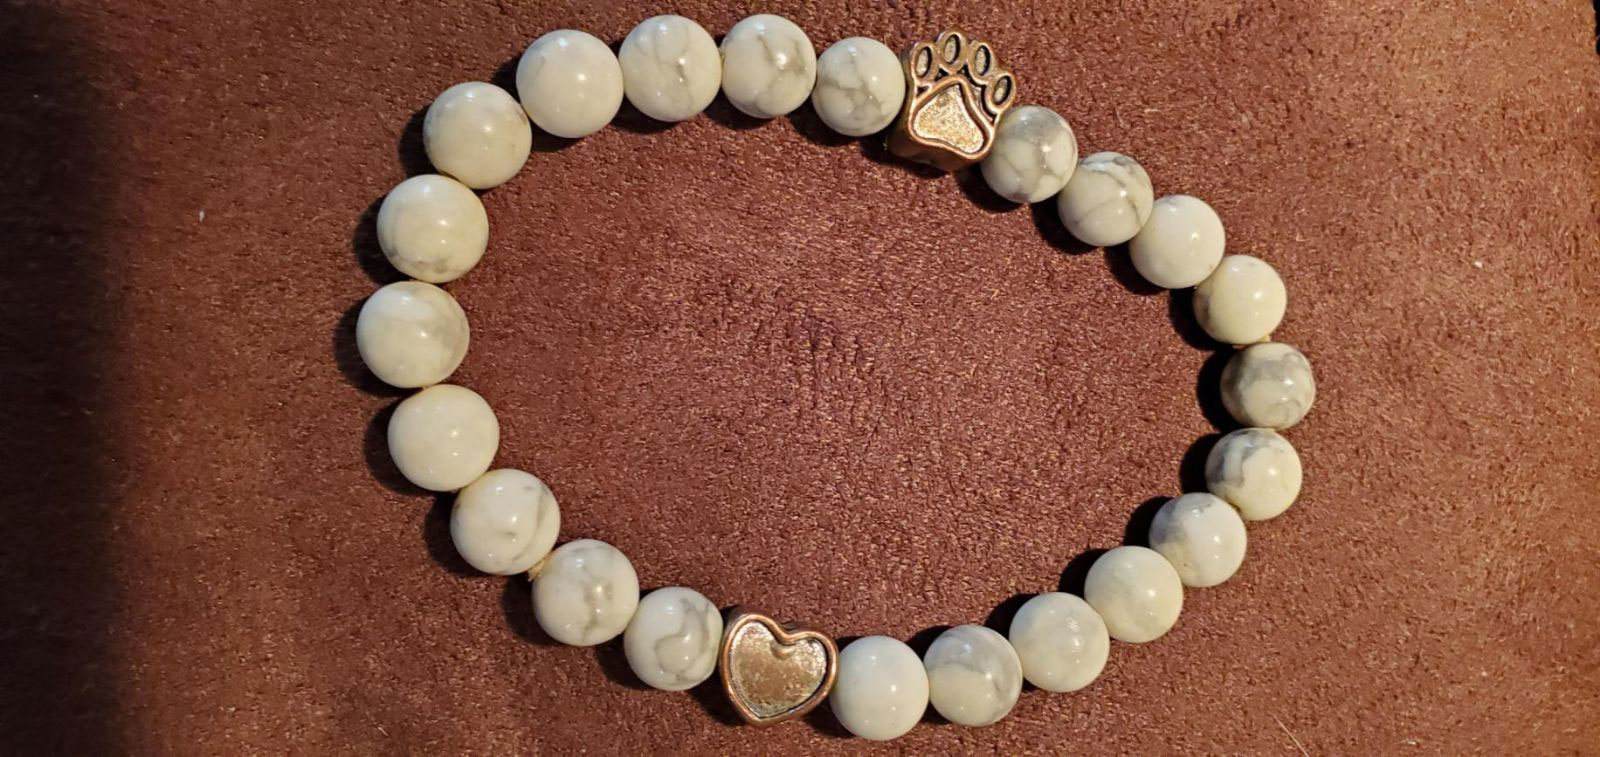 A moonstone elastic bracelet with a paw print and heart charm. The moonstone is a light grey and creamy white color.